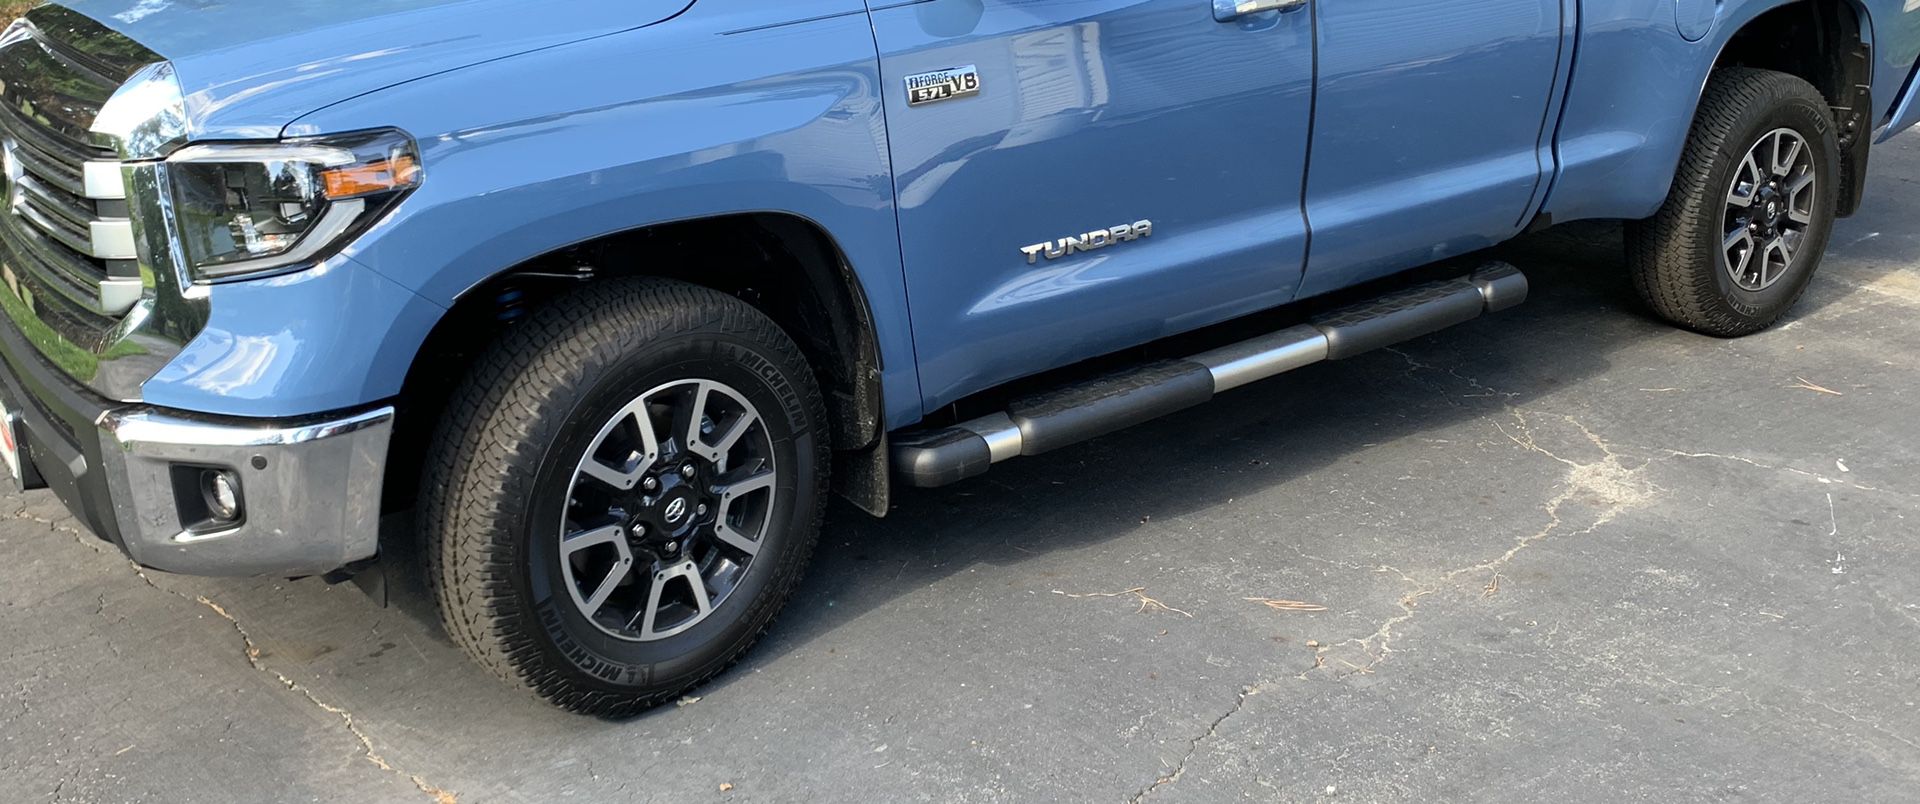 New Tundra wheels and tires